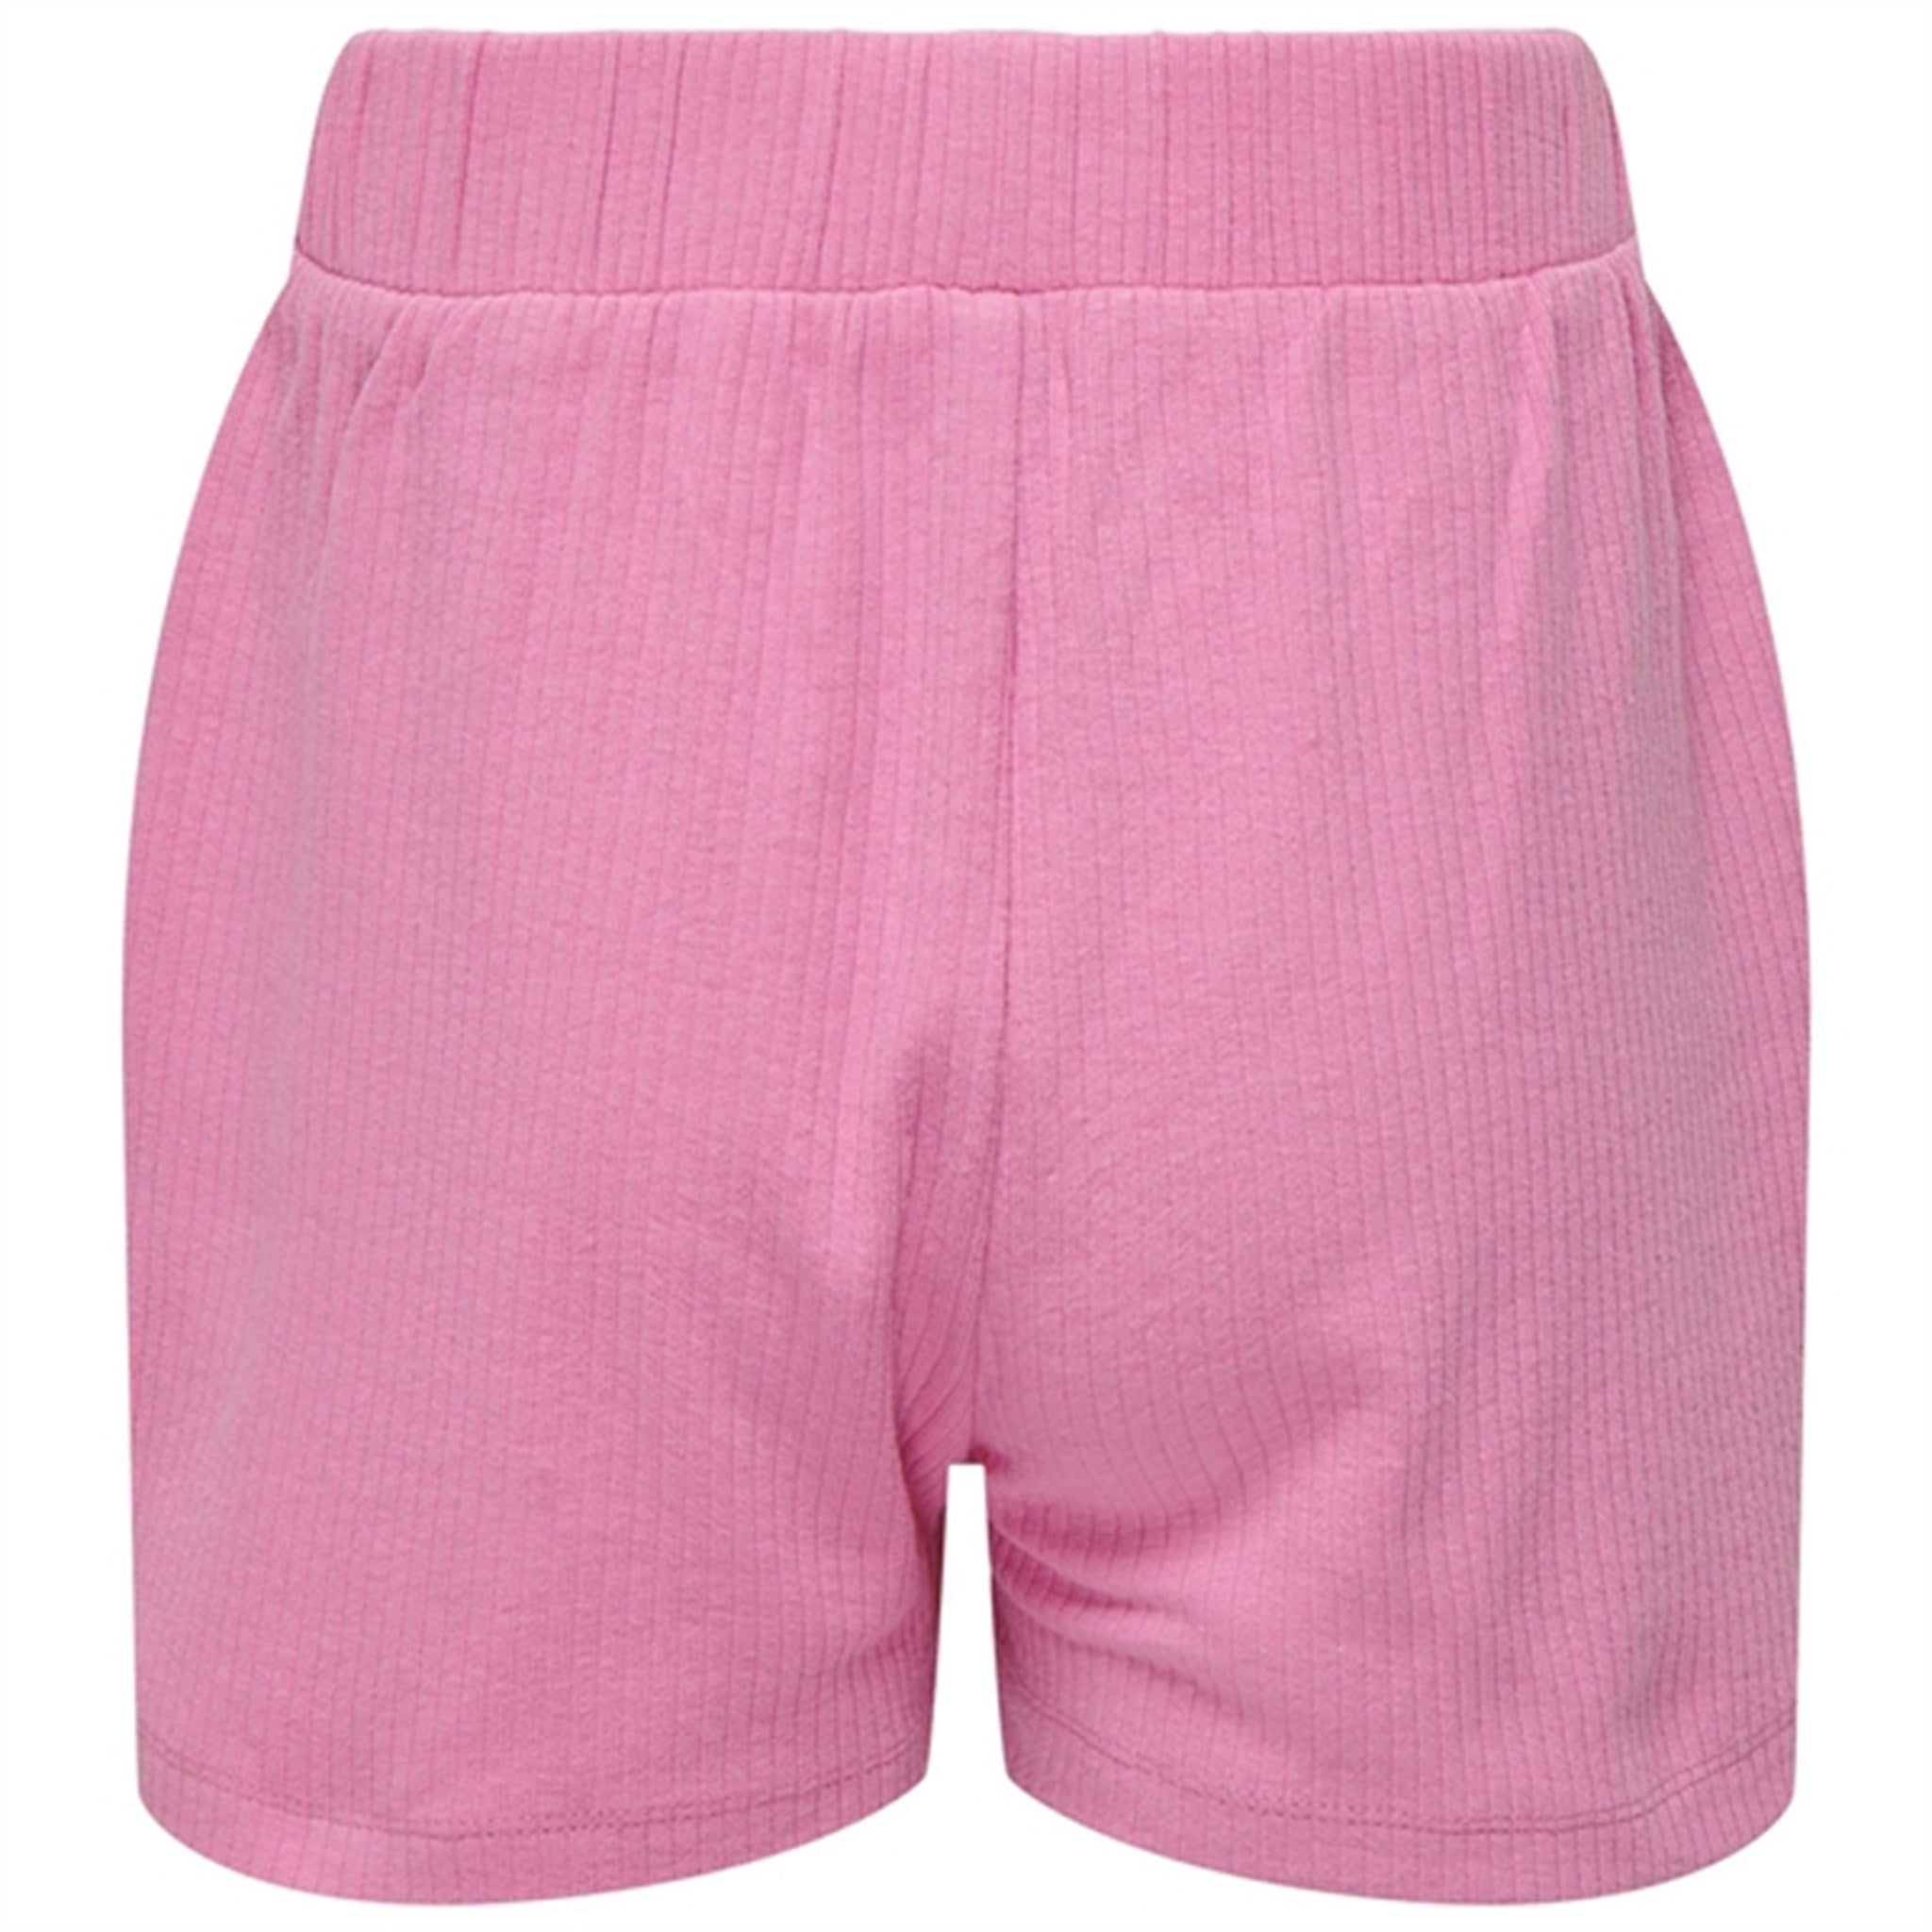 Kids ONLY Wild Orchid Sara Loungewear Shorts 2